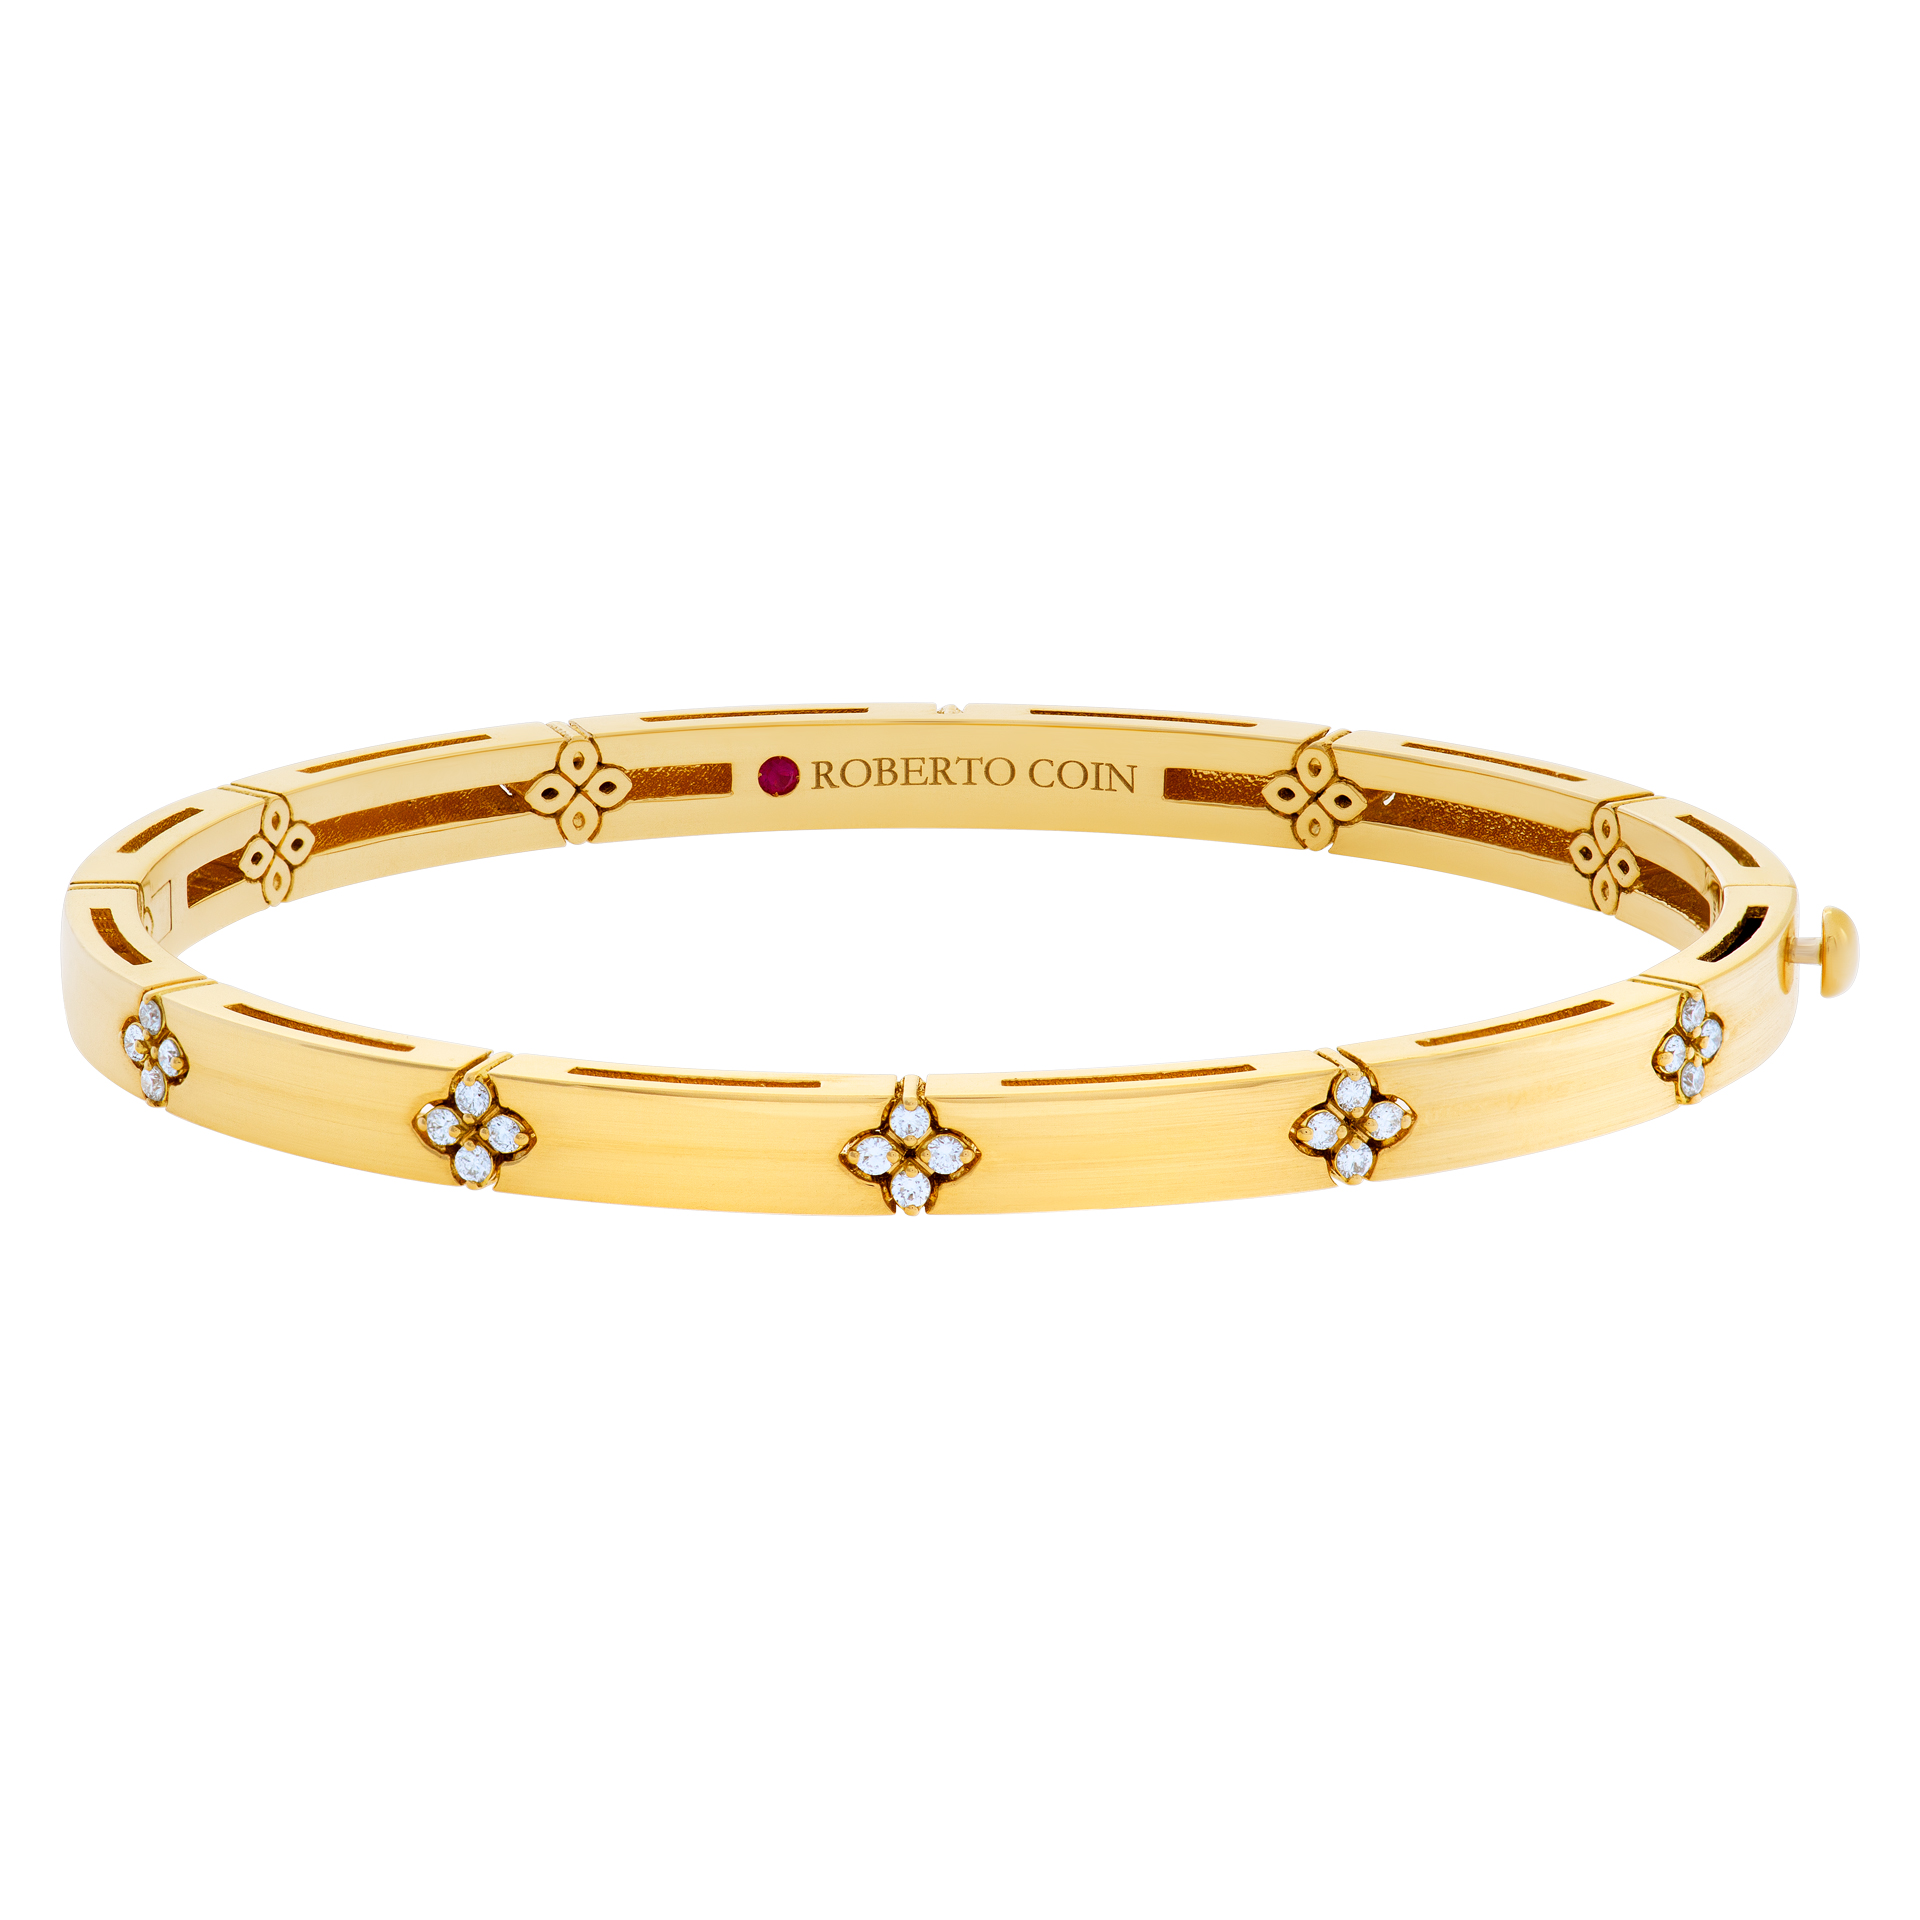 Roberto Coin Verona bangle in 18k yellow gold with diamond accent